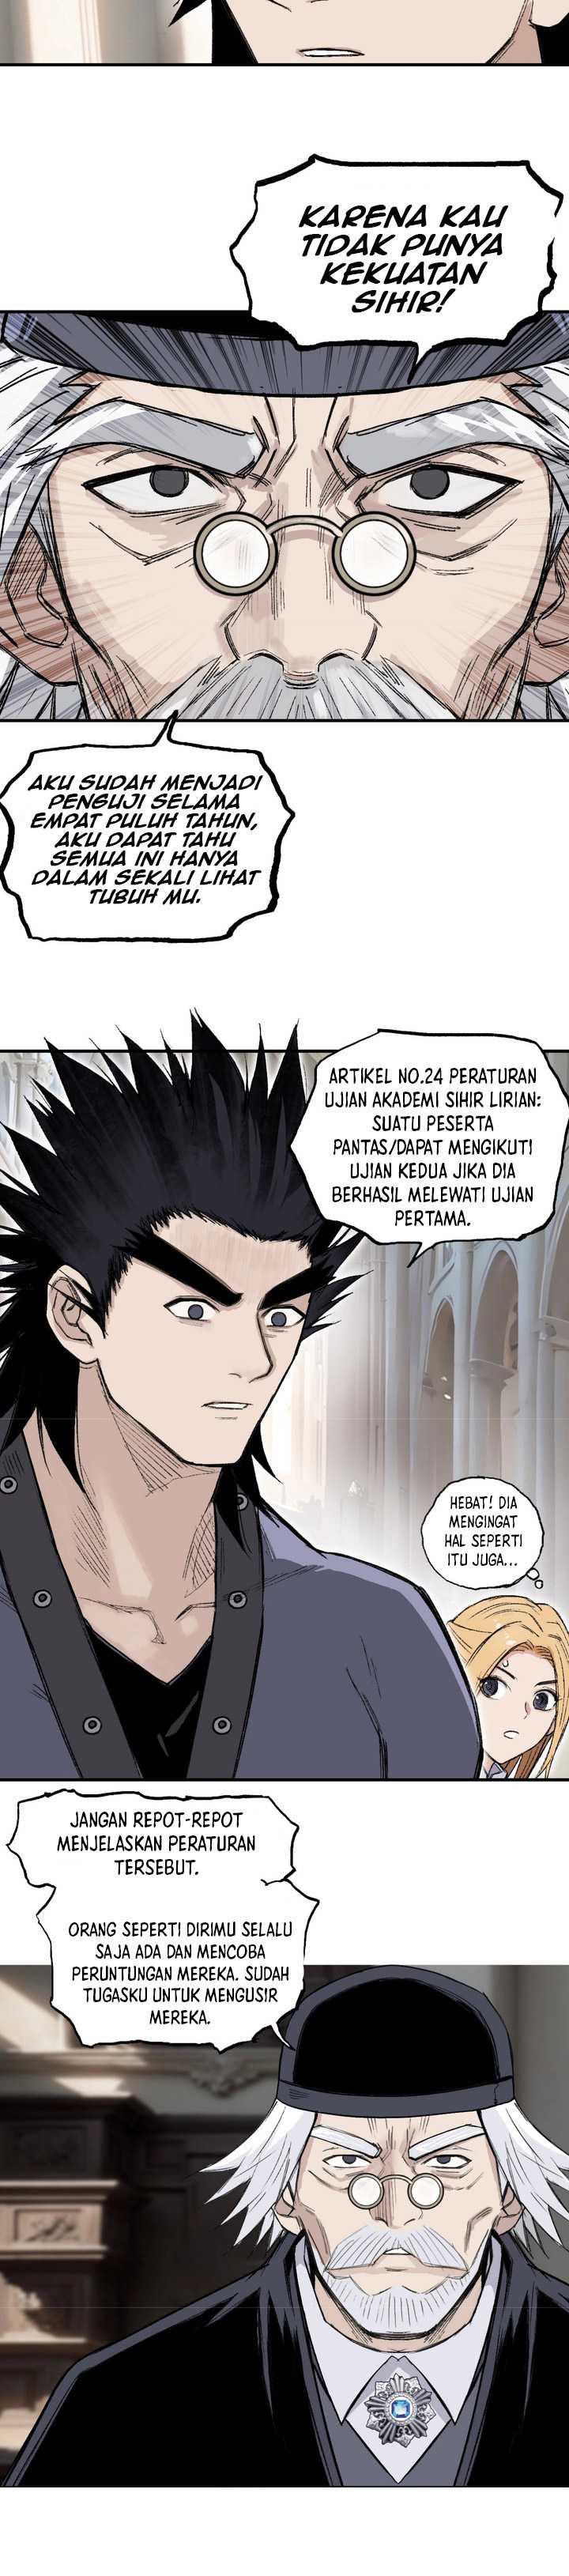 Muscle Mage Chapter 03